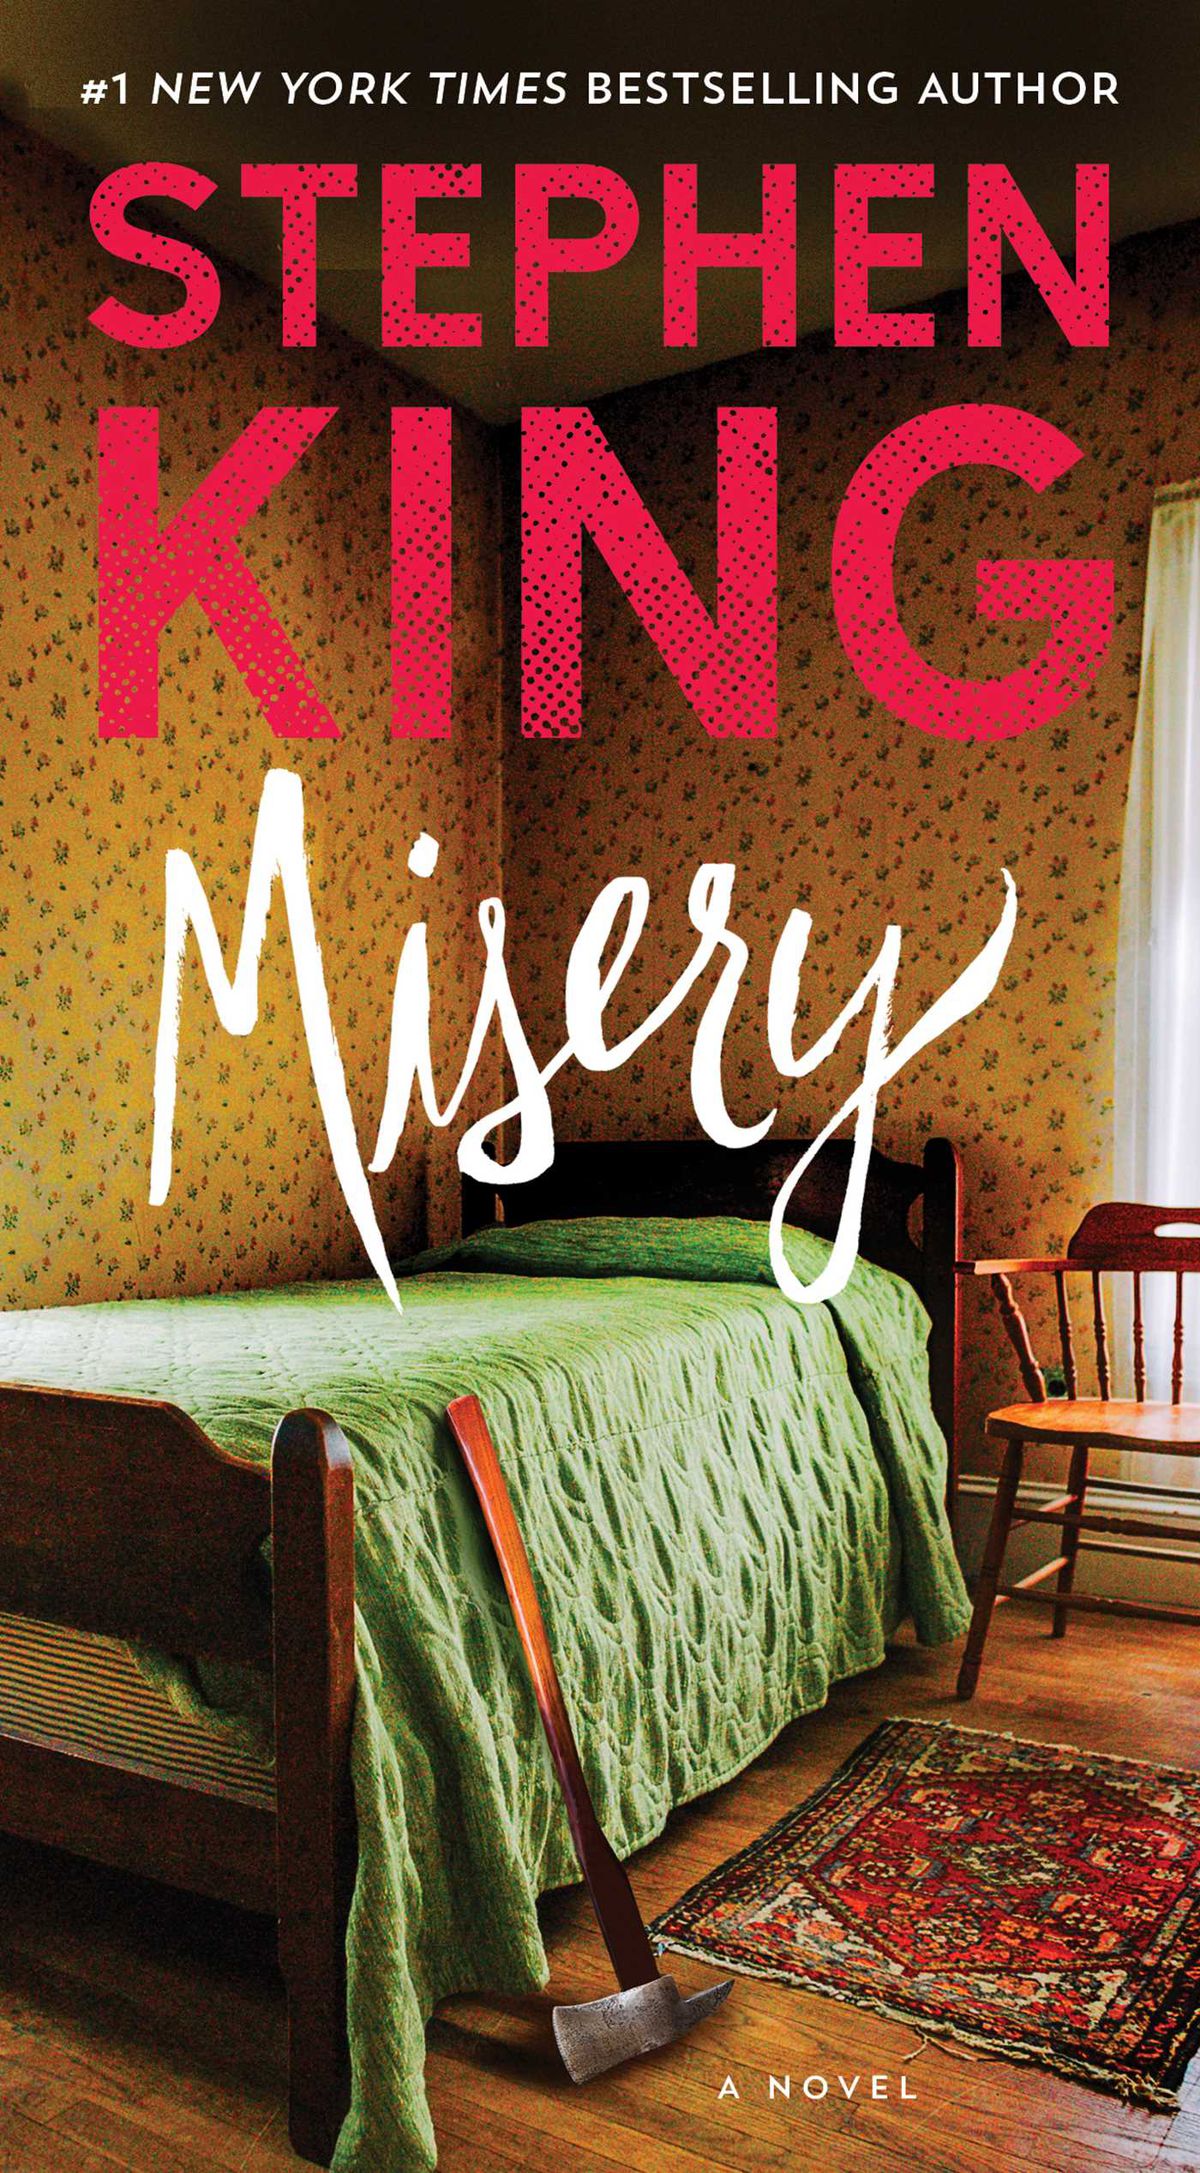 A cover of Stephen King’s Misery, showing a quaint cottage bedroom with yellow wallpaper with a flower pattern, a wooden chair, a single wooden bed with a green coverlet, and an axe leaning up against the foot of the bed